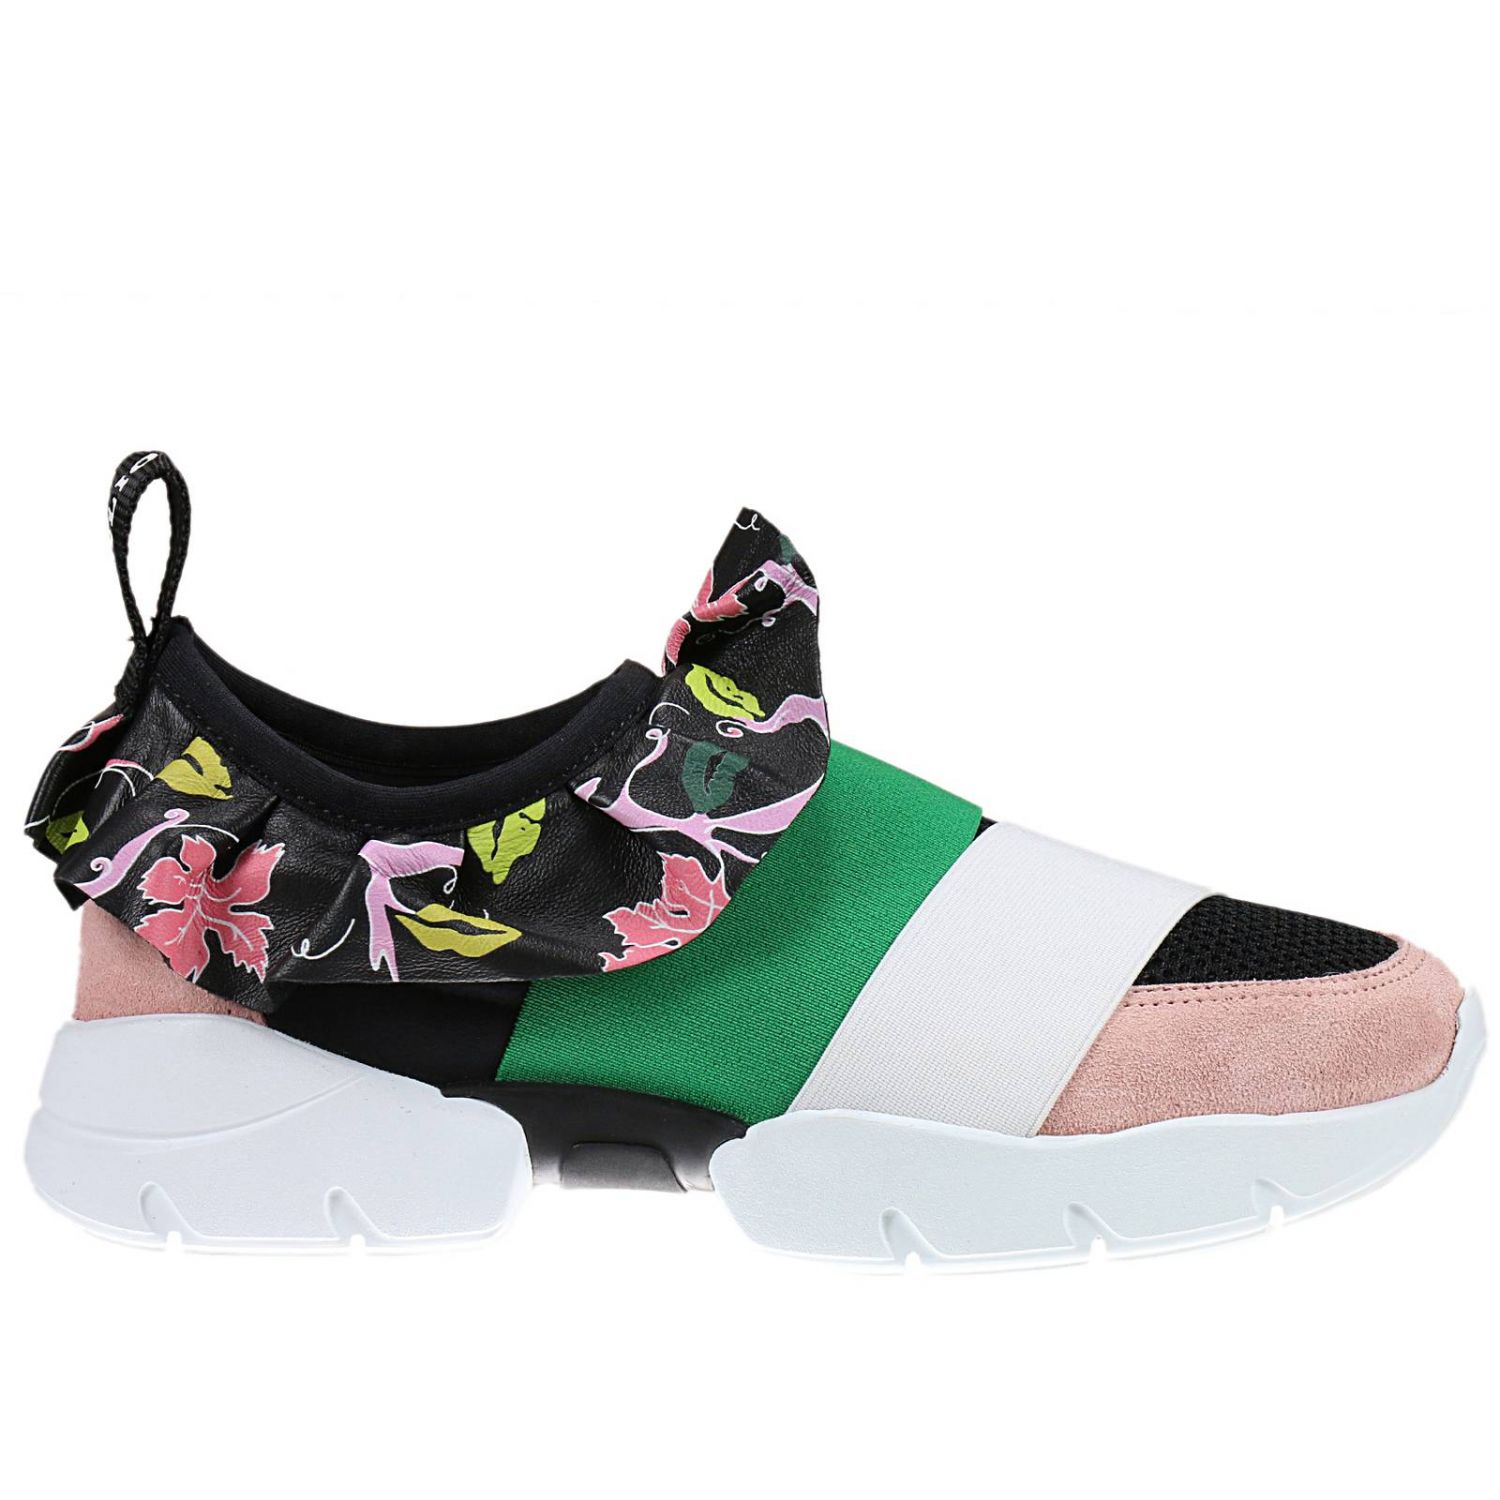 Shoes woman Emilio Pucci | Sneakers Emilio Pucci Women Green | Sneakers ...